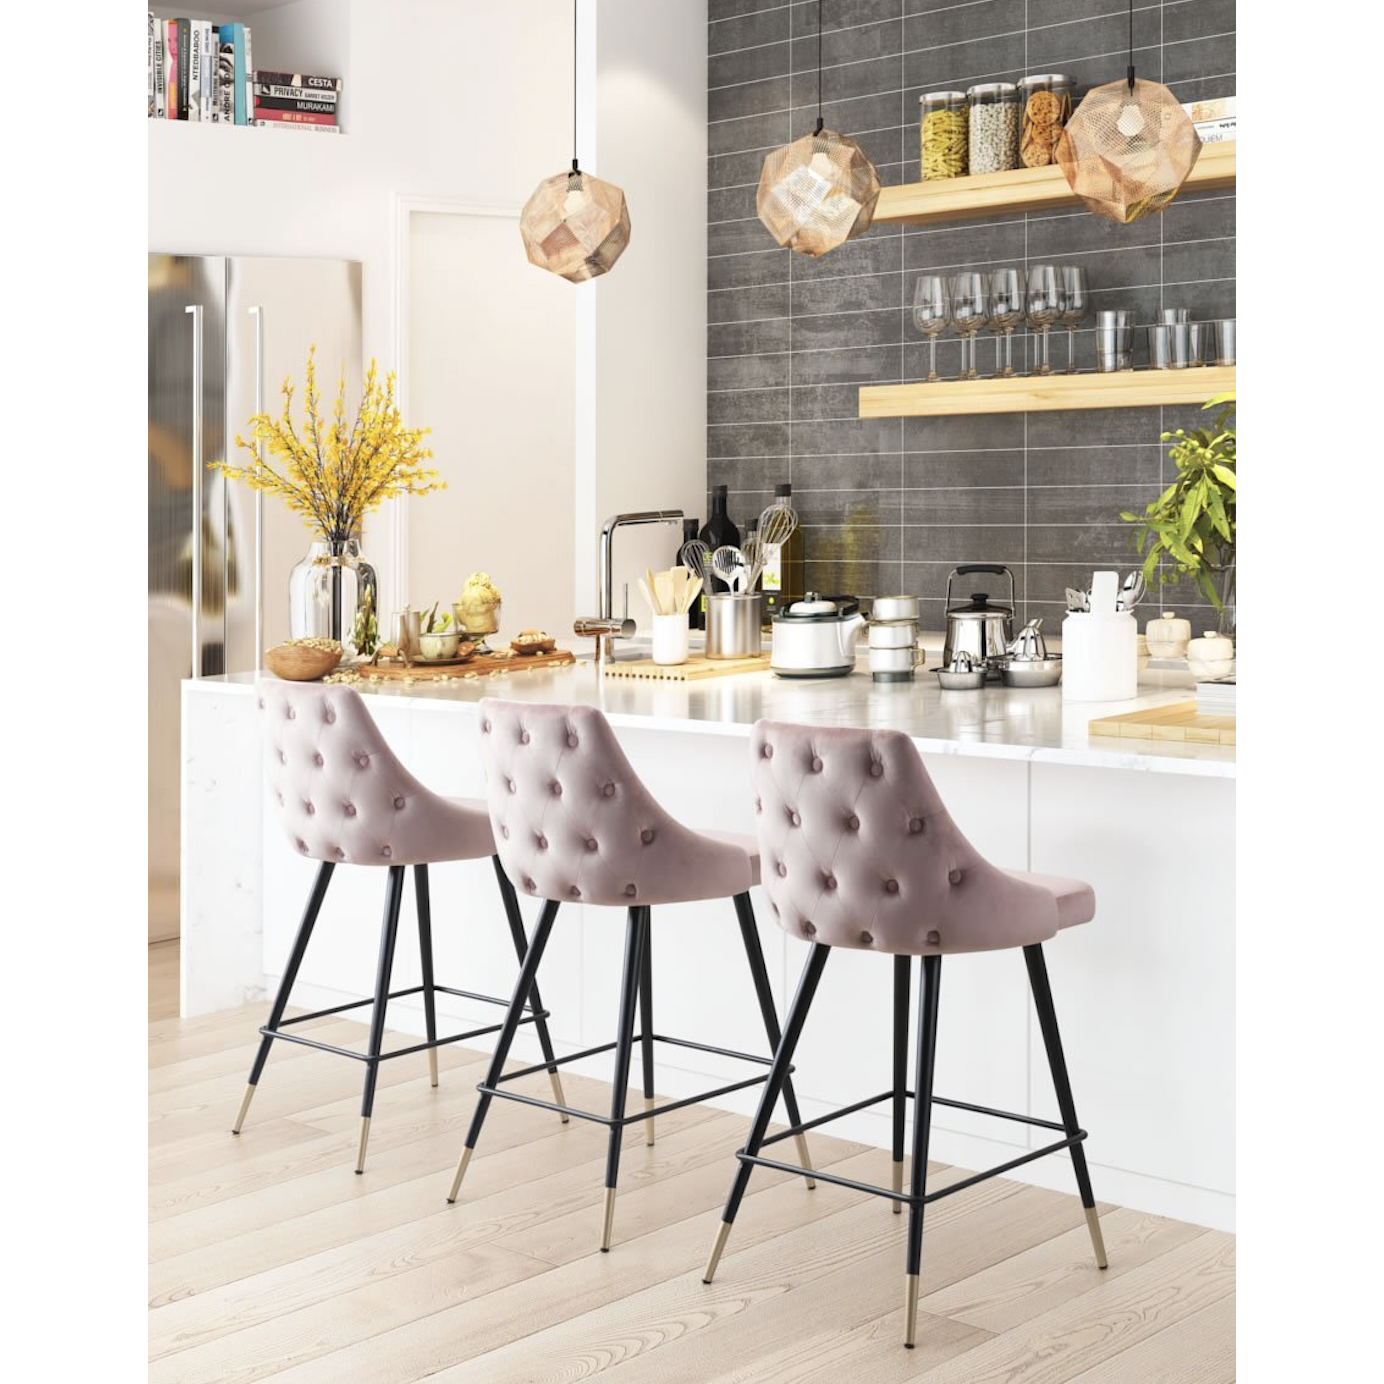 Luxe Pink Velvet Counter Stool With Gold Tipped Steel Legs